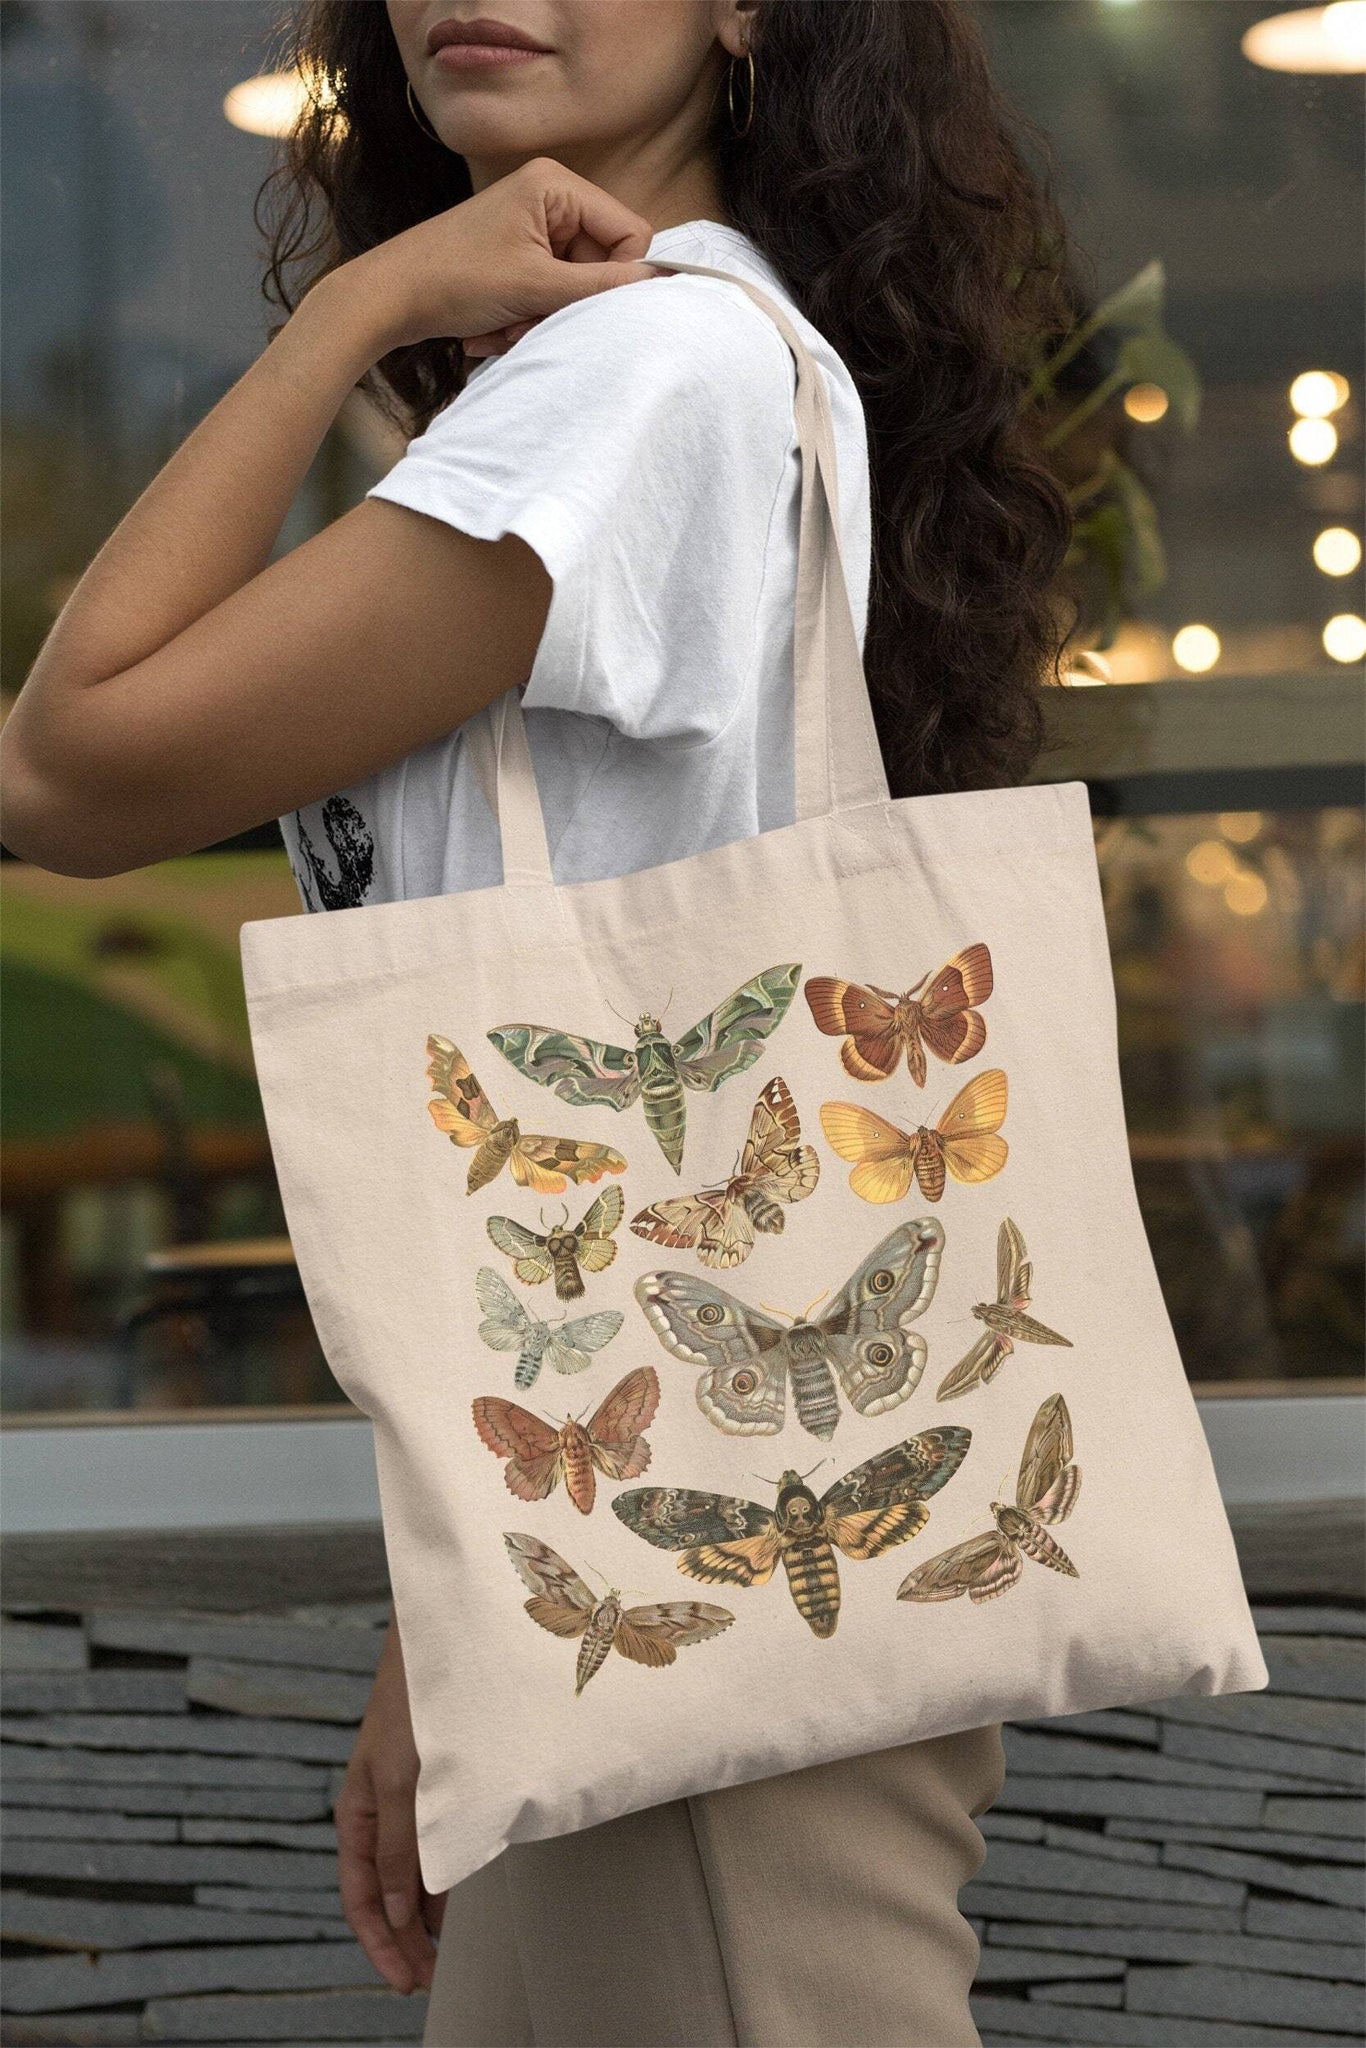 Natural Moth Repellent Scent Bags | Fill your wardrobe with fragrance |  Clothes Storage | Chemical Free | Hated by Moths - Lasts for 3 Months :  Amazon.co.uk: Garden